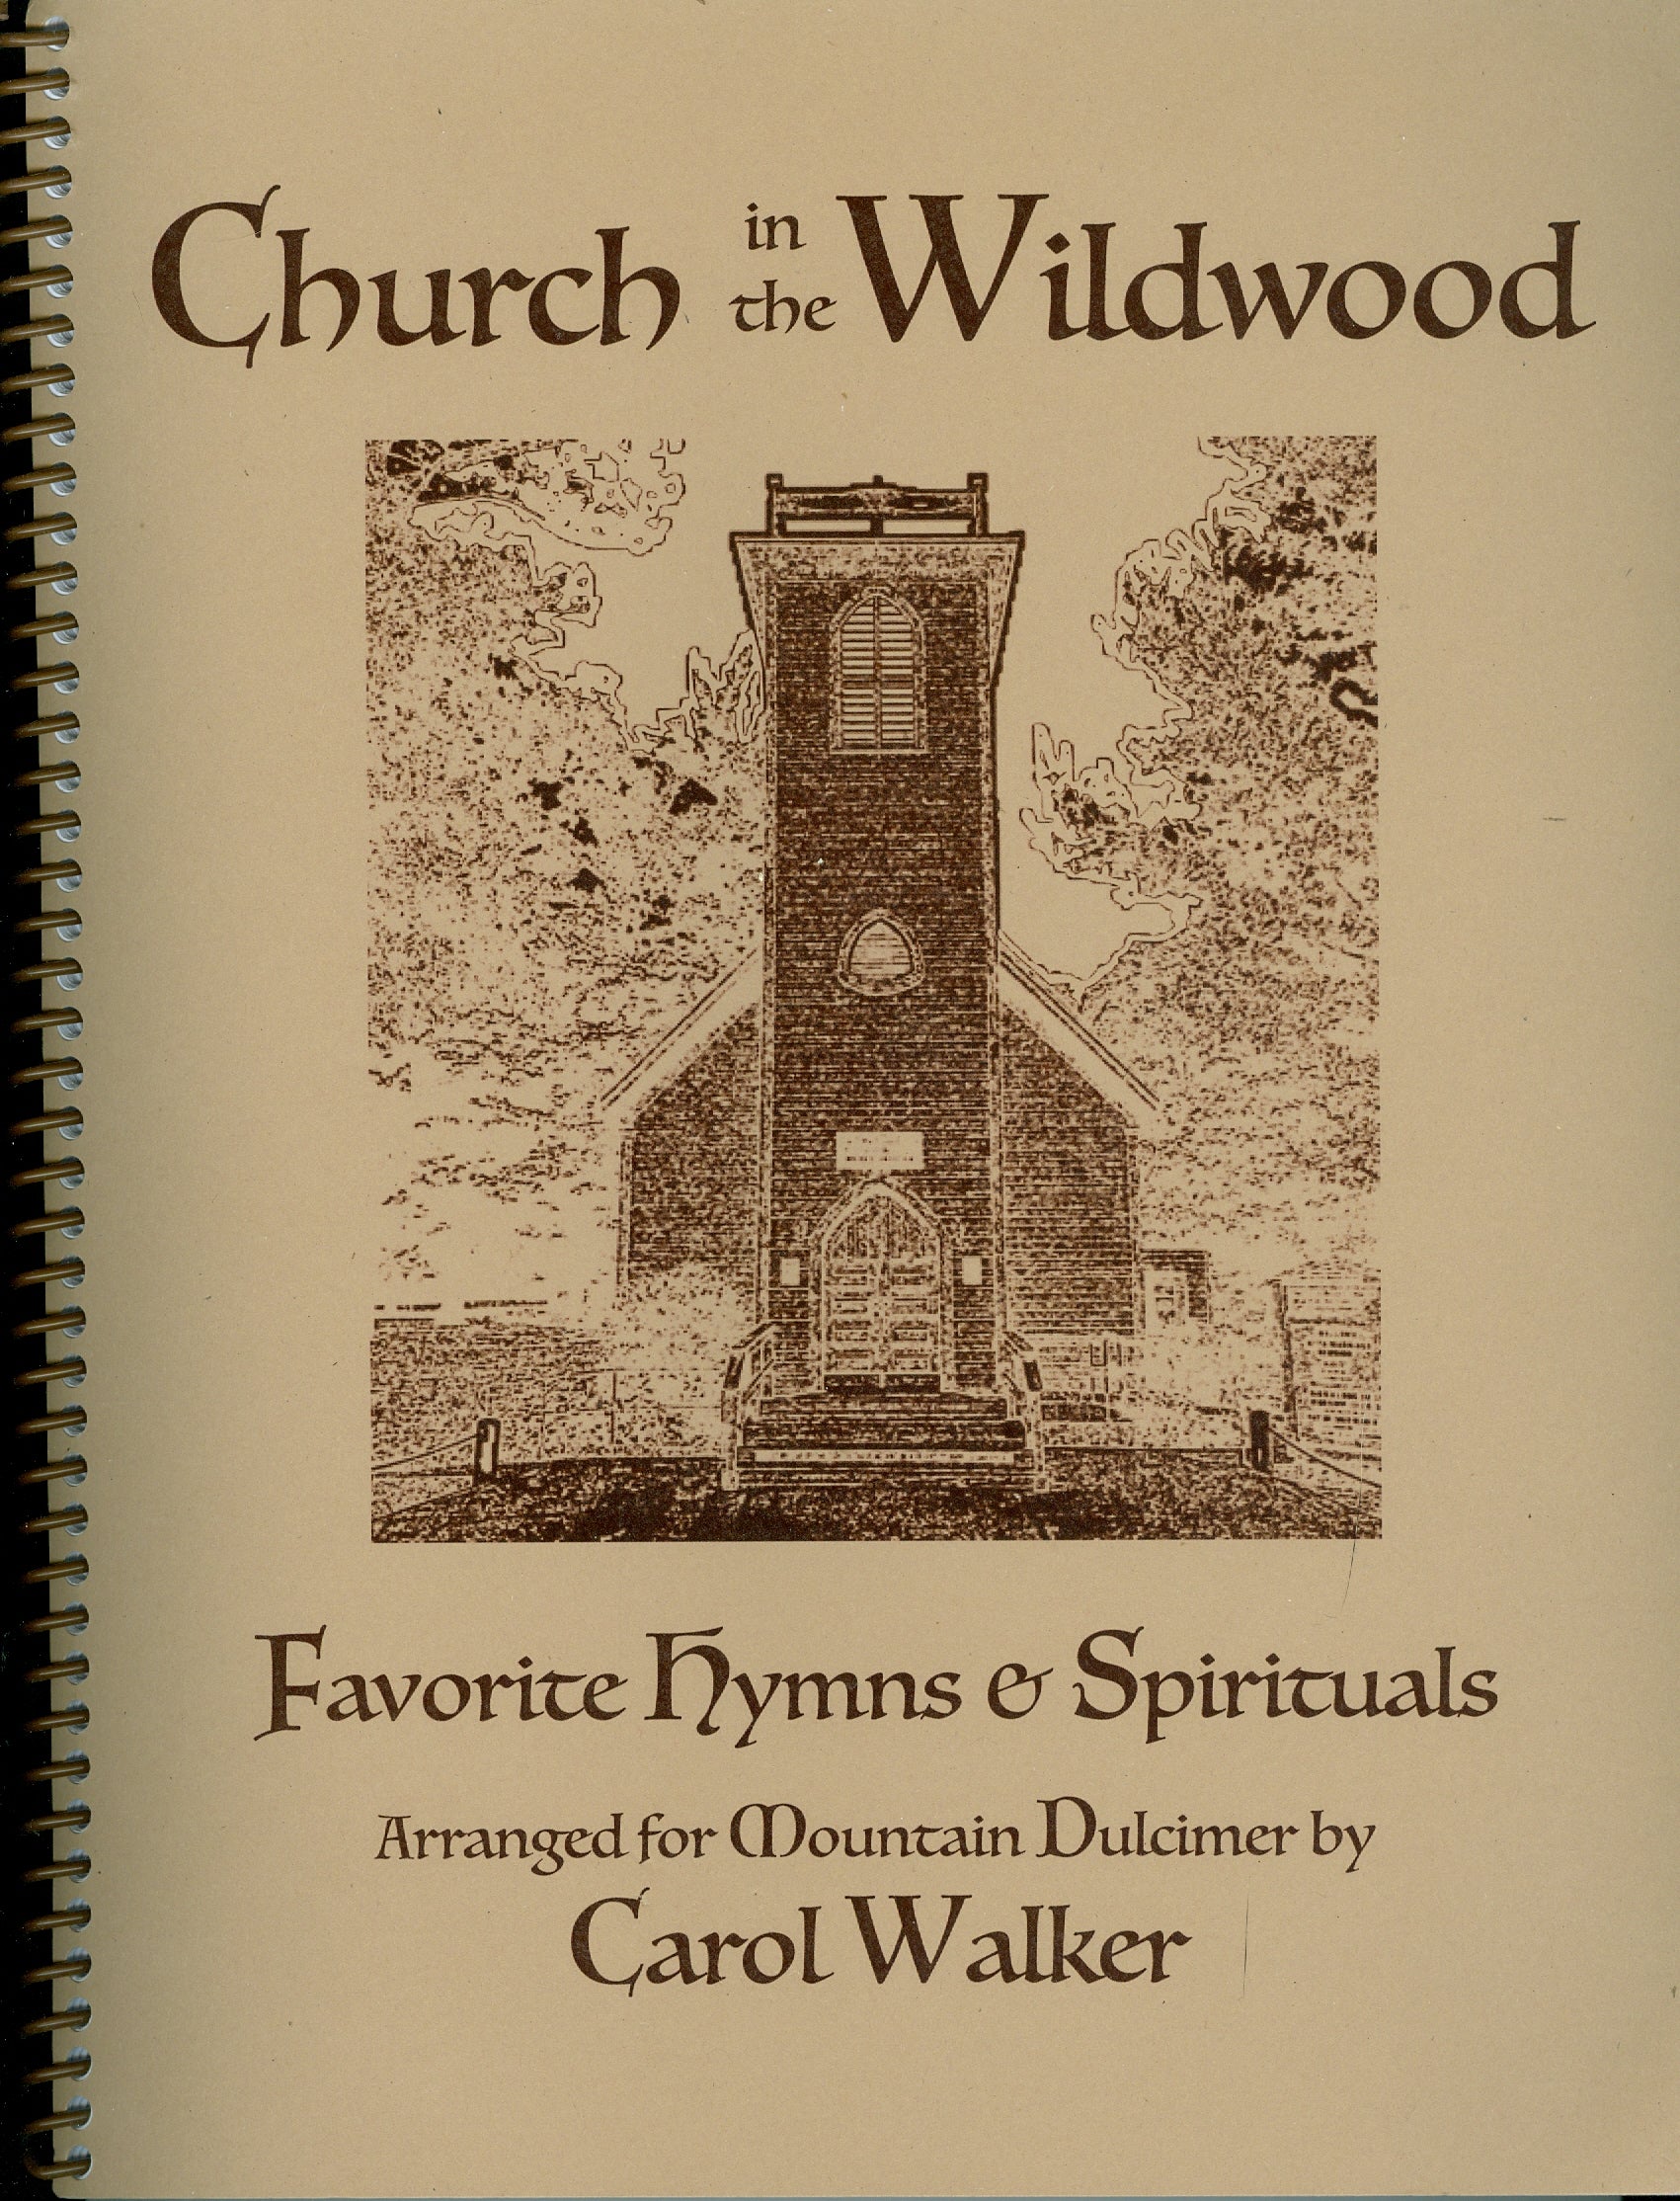 Church in the Wildwood by Carol Walker featuring favorite hymns and spirituals.